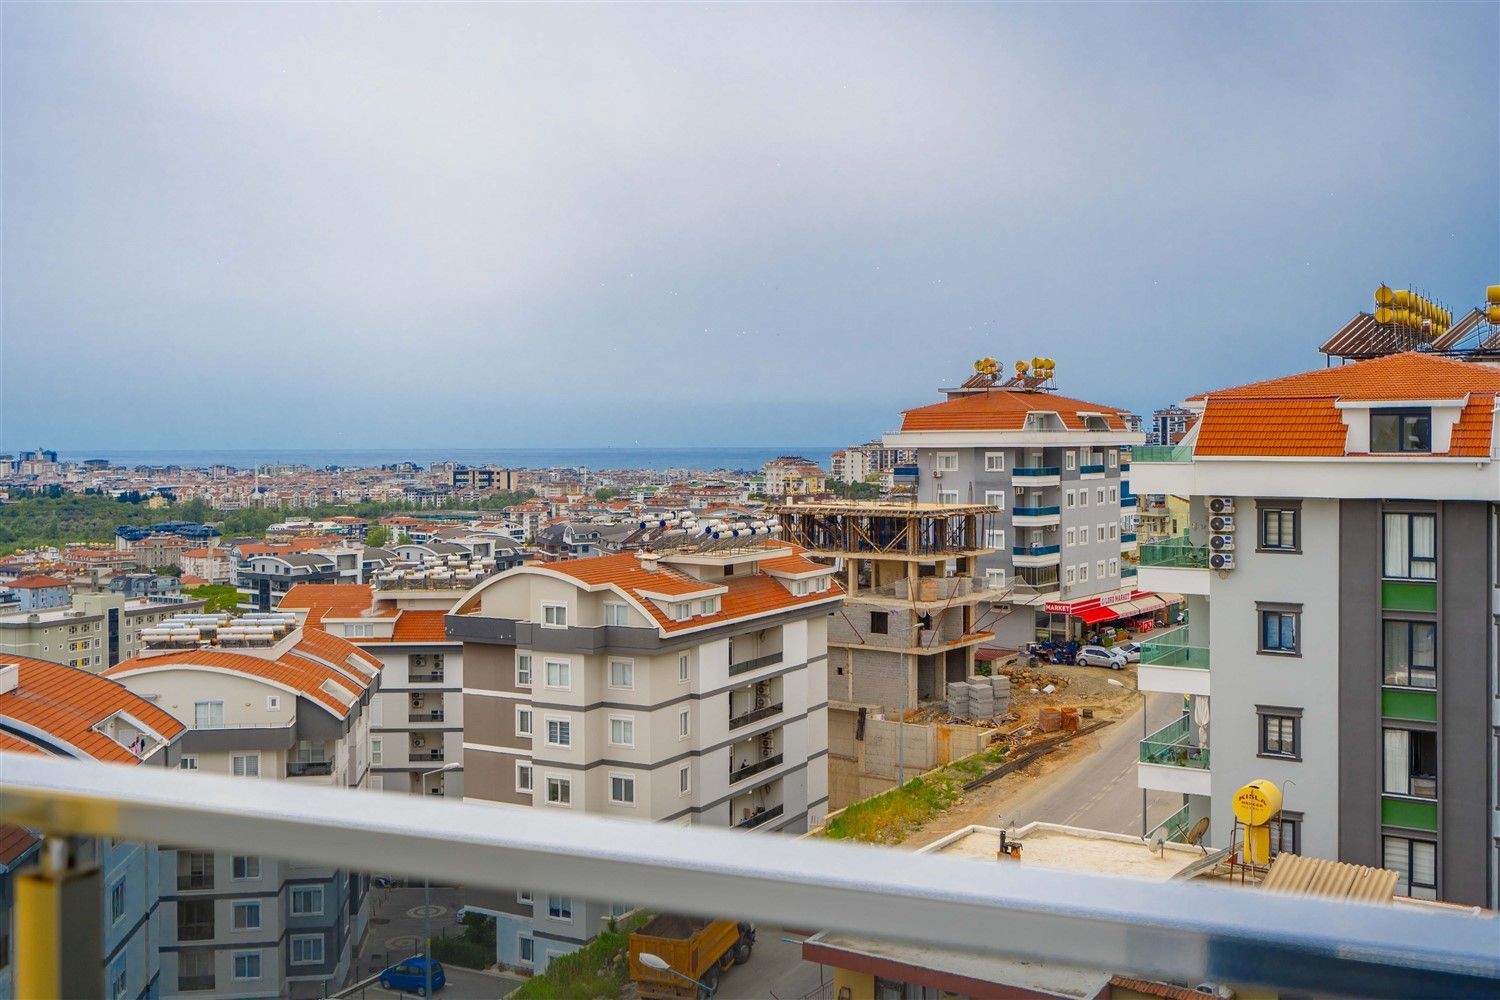 2 bedroom apartment with separate kitchen - Chiplakli district, Alanya